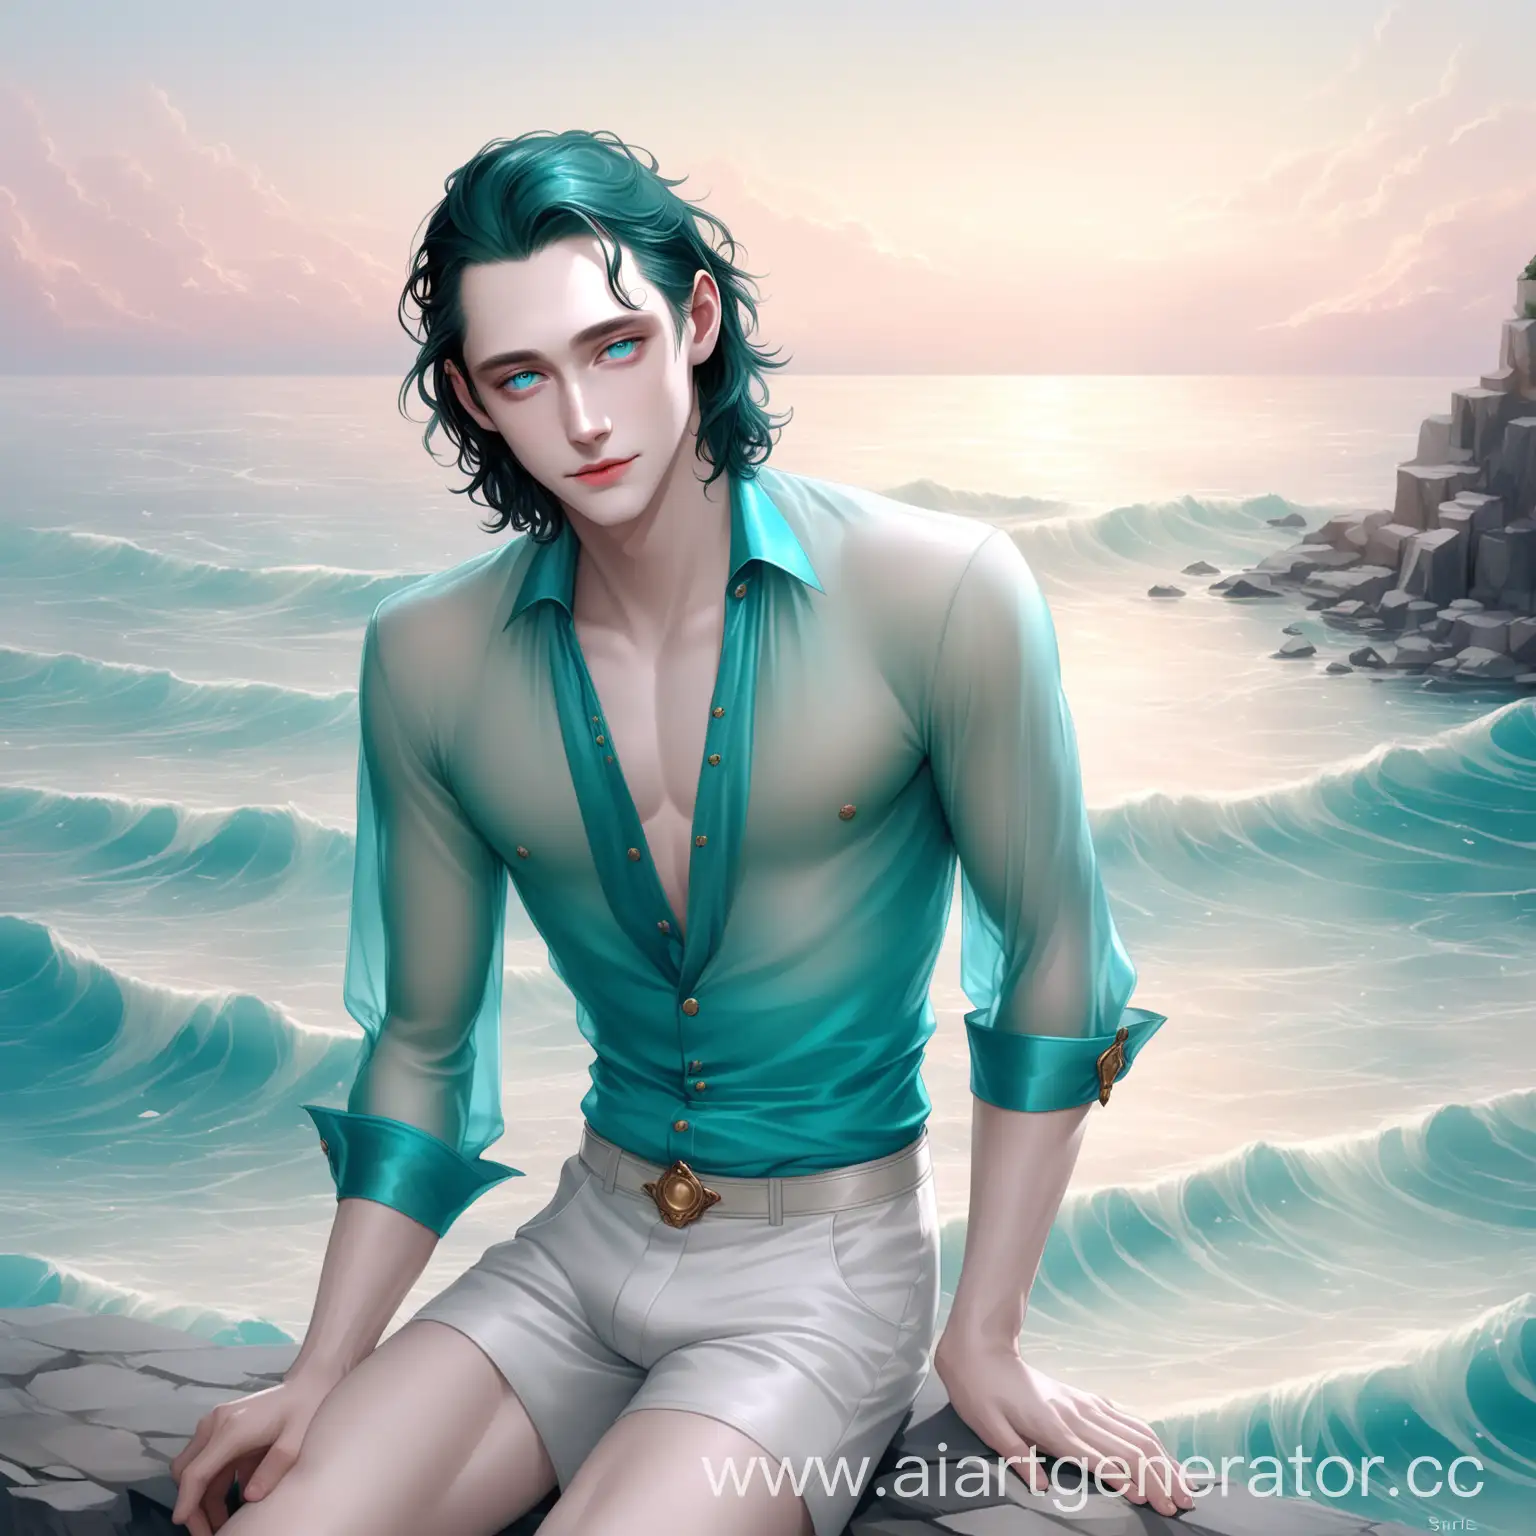 digital art, young attractive charming man Loki, svelte, lithe, lean, elegant physique, lovely, precious man, refined, elegant appearance, puppy, kind, melancholic, azure eyes, aristocratic, delicate, exquisite, pleasant, sharp facial features, lovely, rosy, mellow, pink pearly lips, soft, smooth, milk porcelain-like, rosy skin, well-groomed, very long, semi-wavy, beautiful hair, natural beauty, aesthetics of nature and sea, flowing translucent turquoise shirt, white very short shorts.